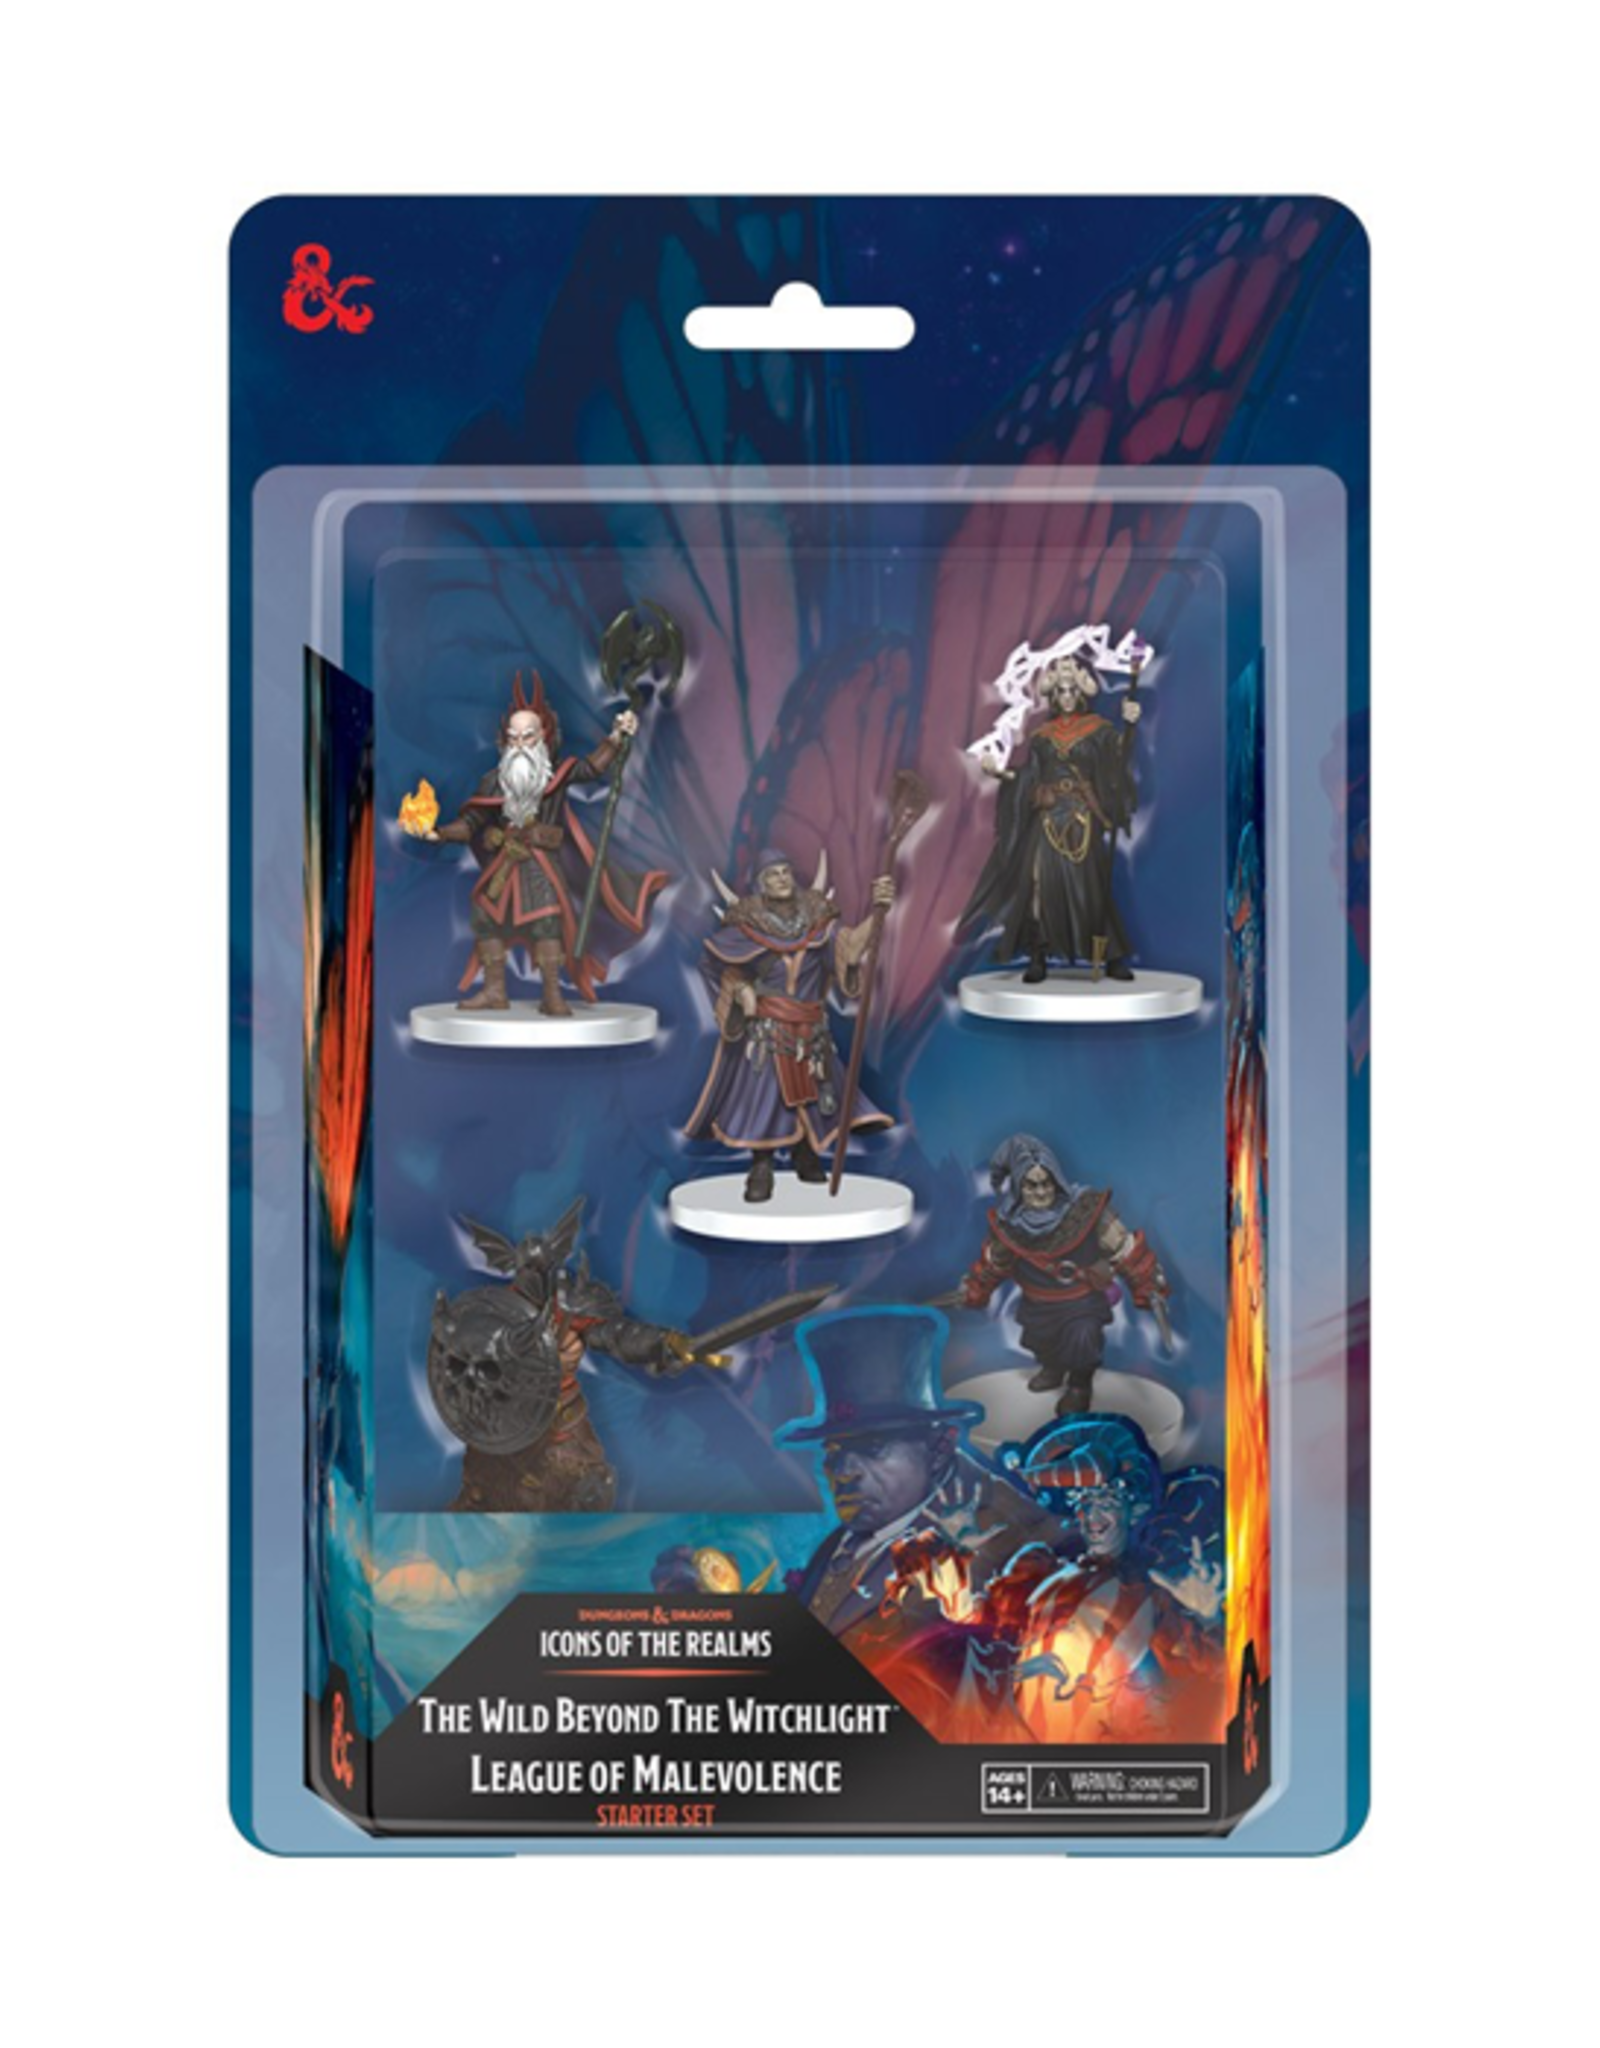 Dungeons & Dragons Dungeons & Dragons: Icons of the Realms - The Wild Beyond the Witchlight - League of Malevolence